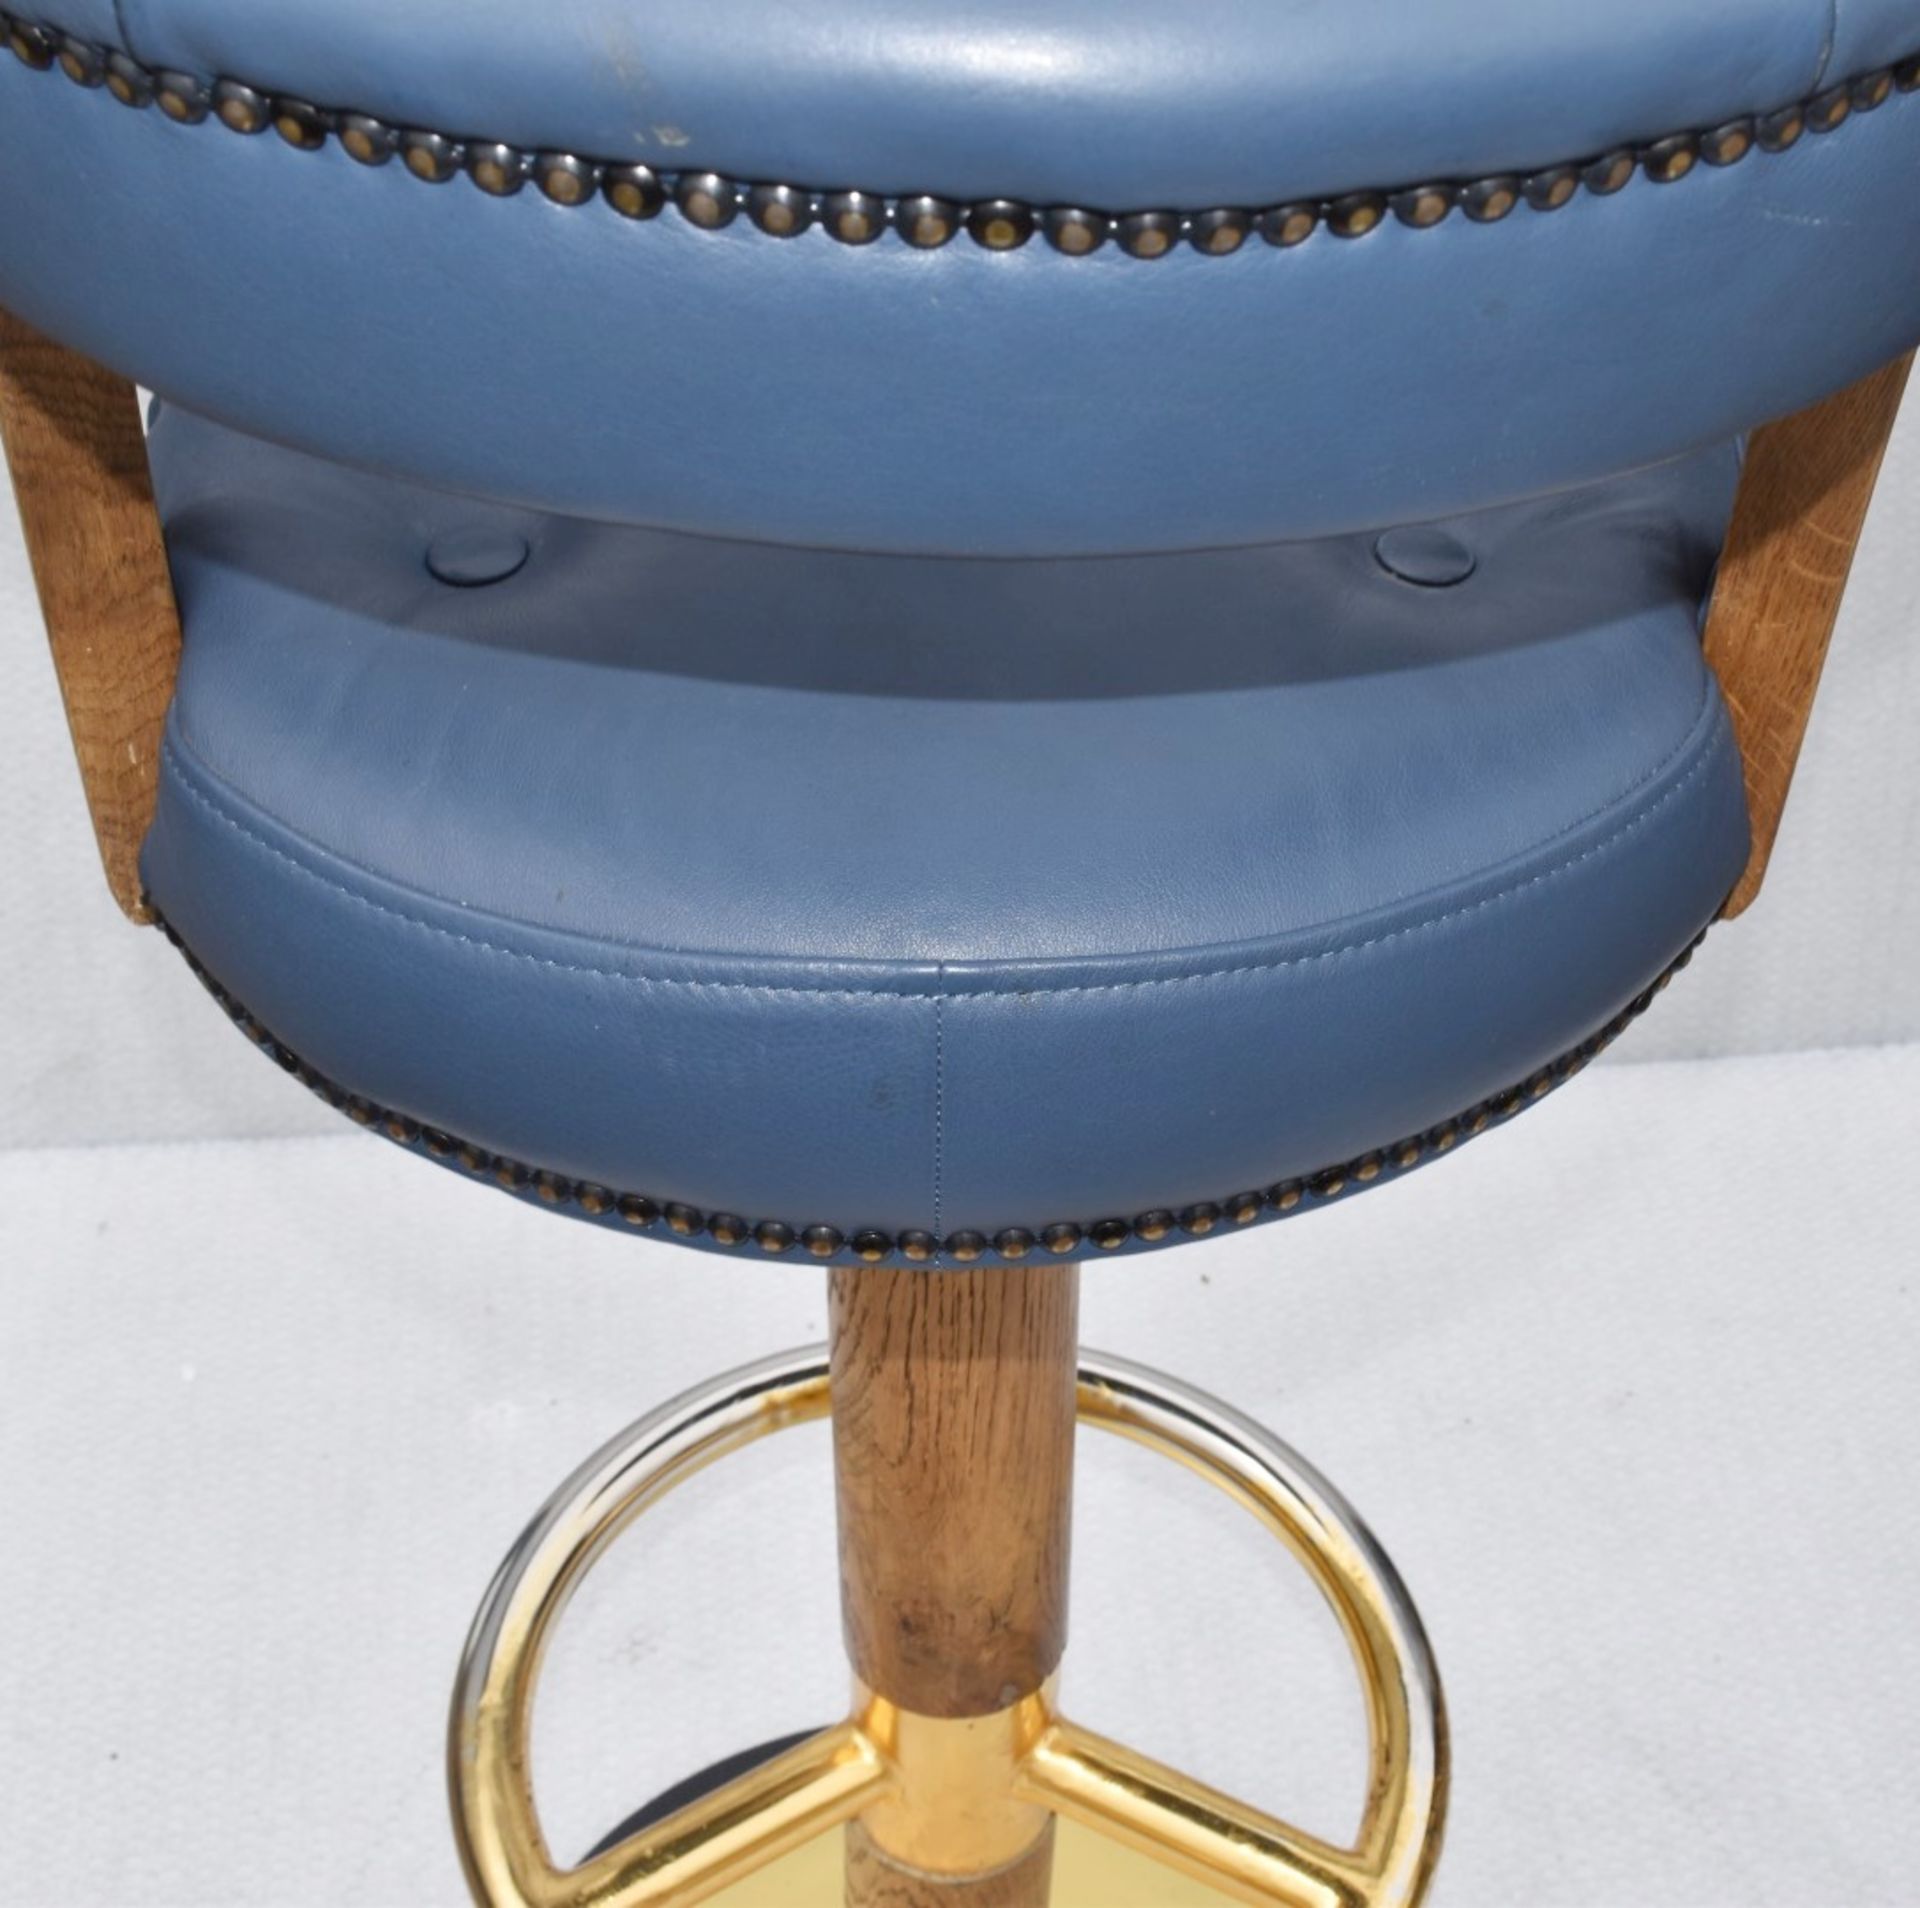 1 x Luxury Buttoned Bar Stool with Wooden Frame, Metal Base, Footrest and Studded Upholstery in a - Image 7 of 8